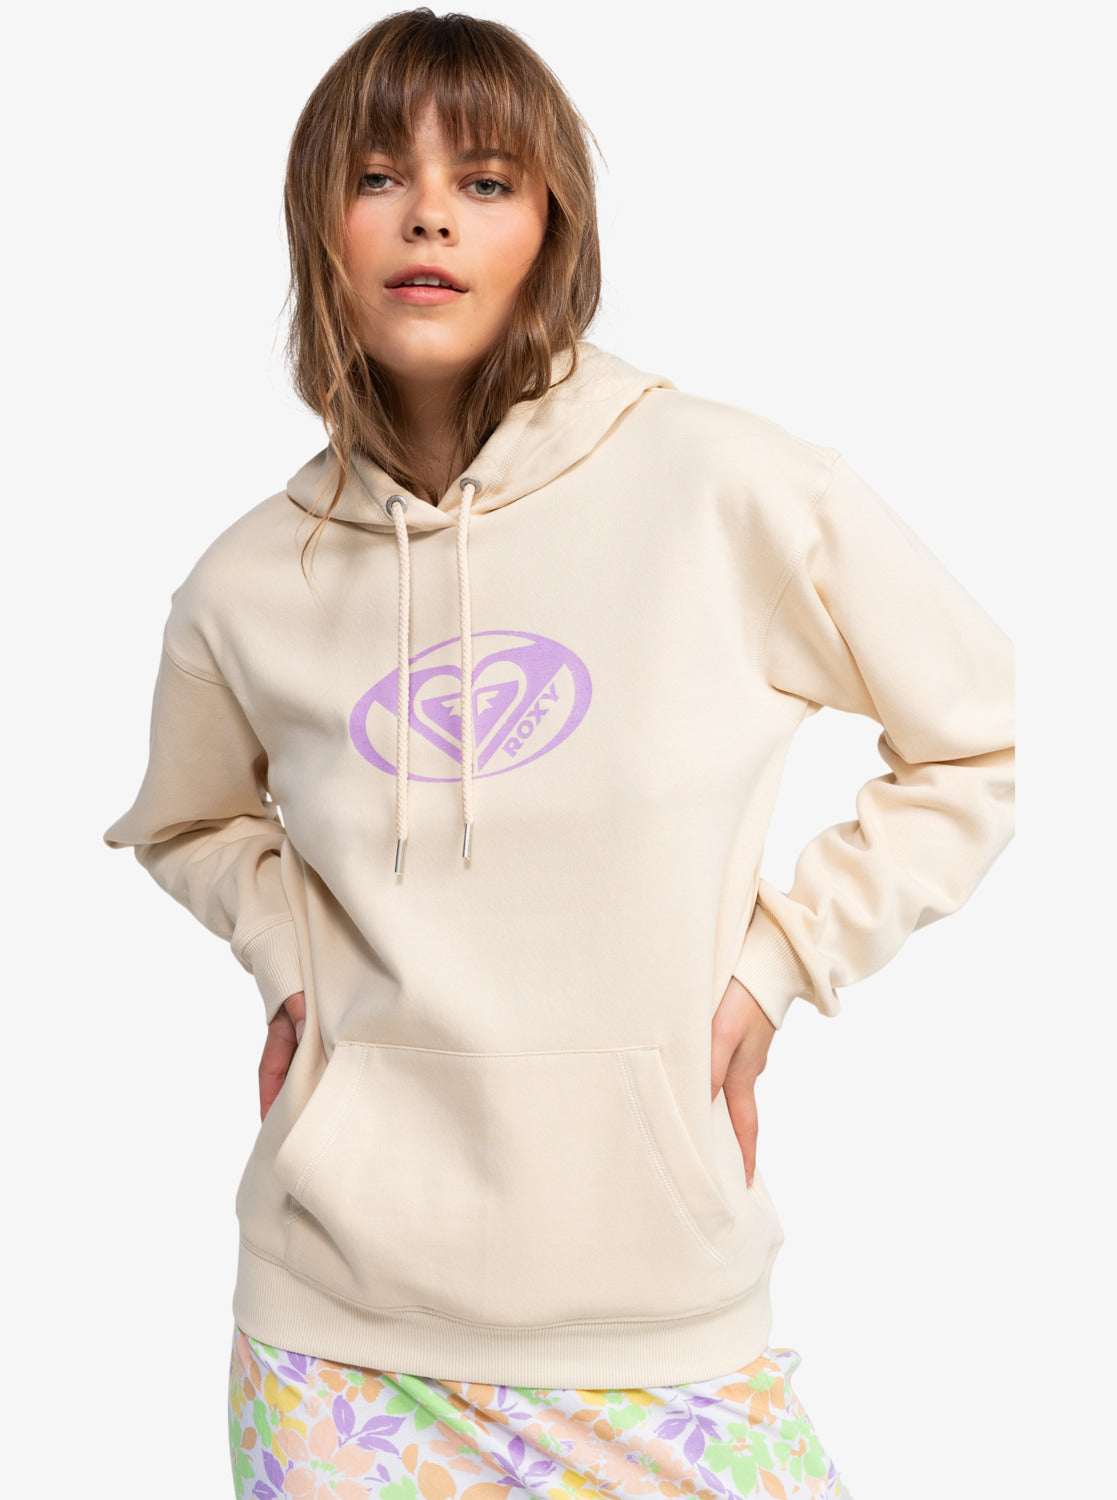 Roxy Surf Stoked Hoodie Brushed A - Tapioca - Star Surf + Skate